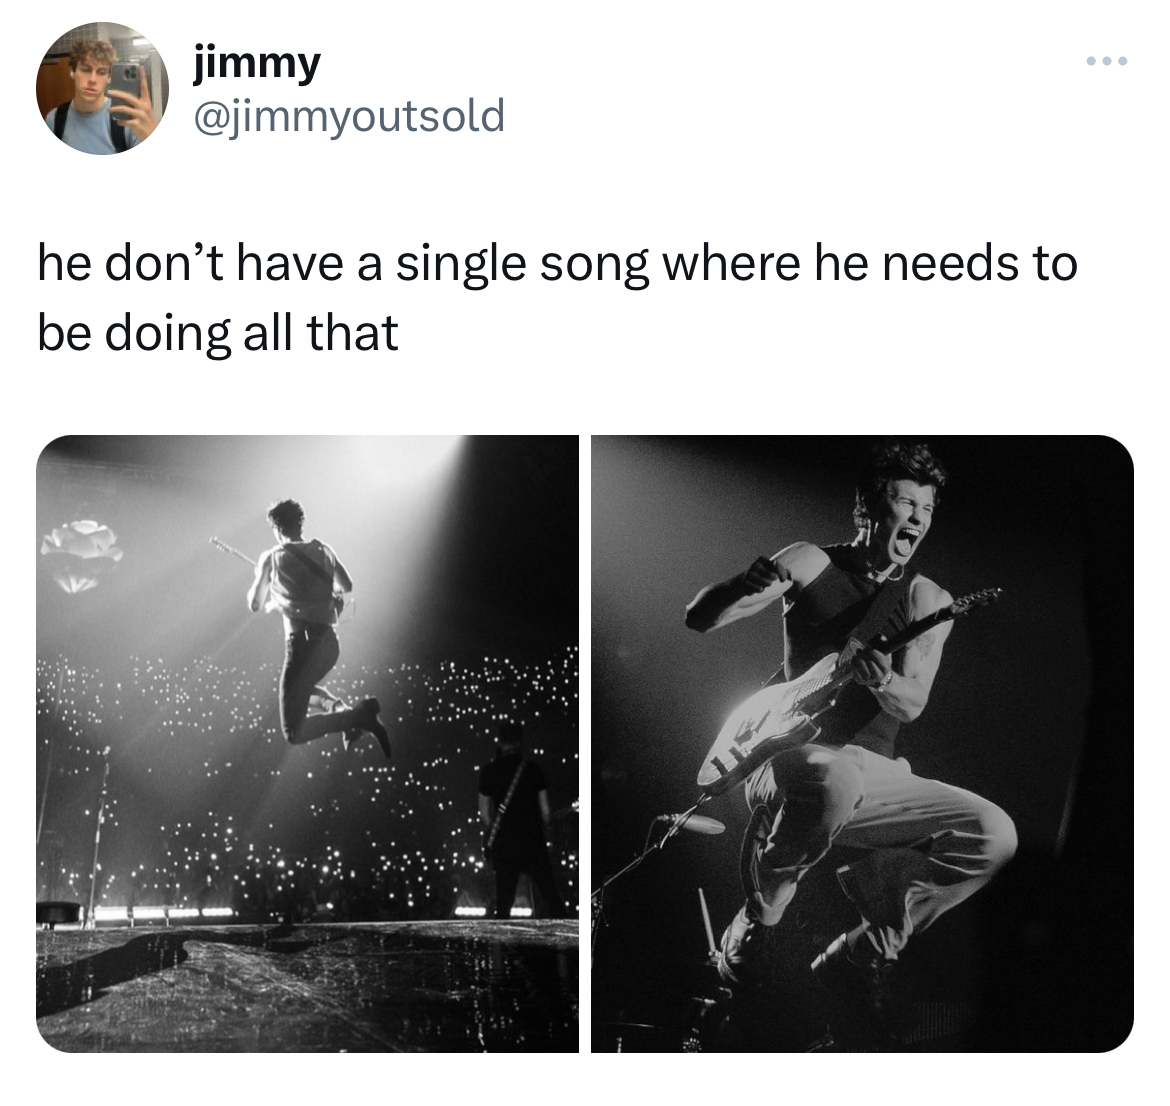 Don't have a single song where they need to do this - rebellion manchester - jimmy he don't have a single song where he needs to be doing all that